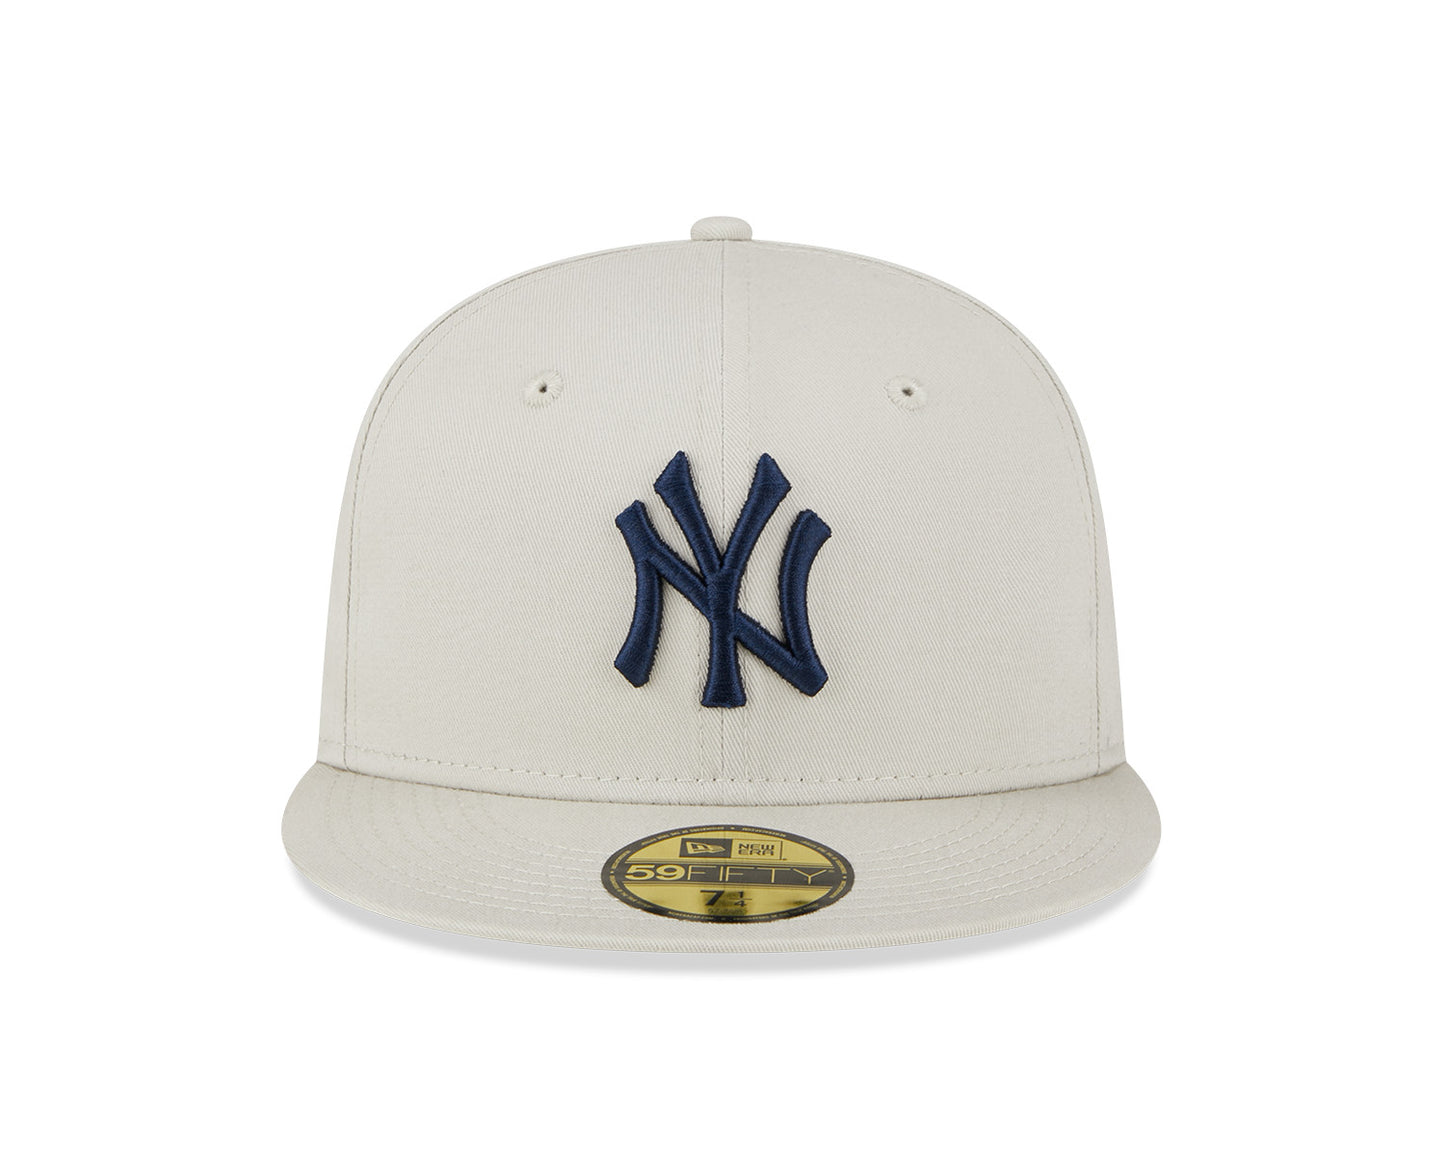 New Era - 59Fifty Fitted Cap - League Essential - New York Yankees - Stone/Navy - Headz Up 